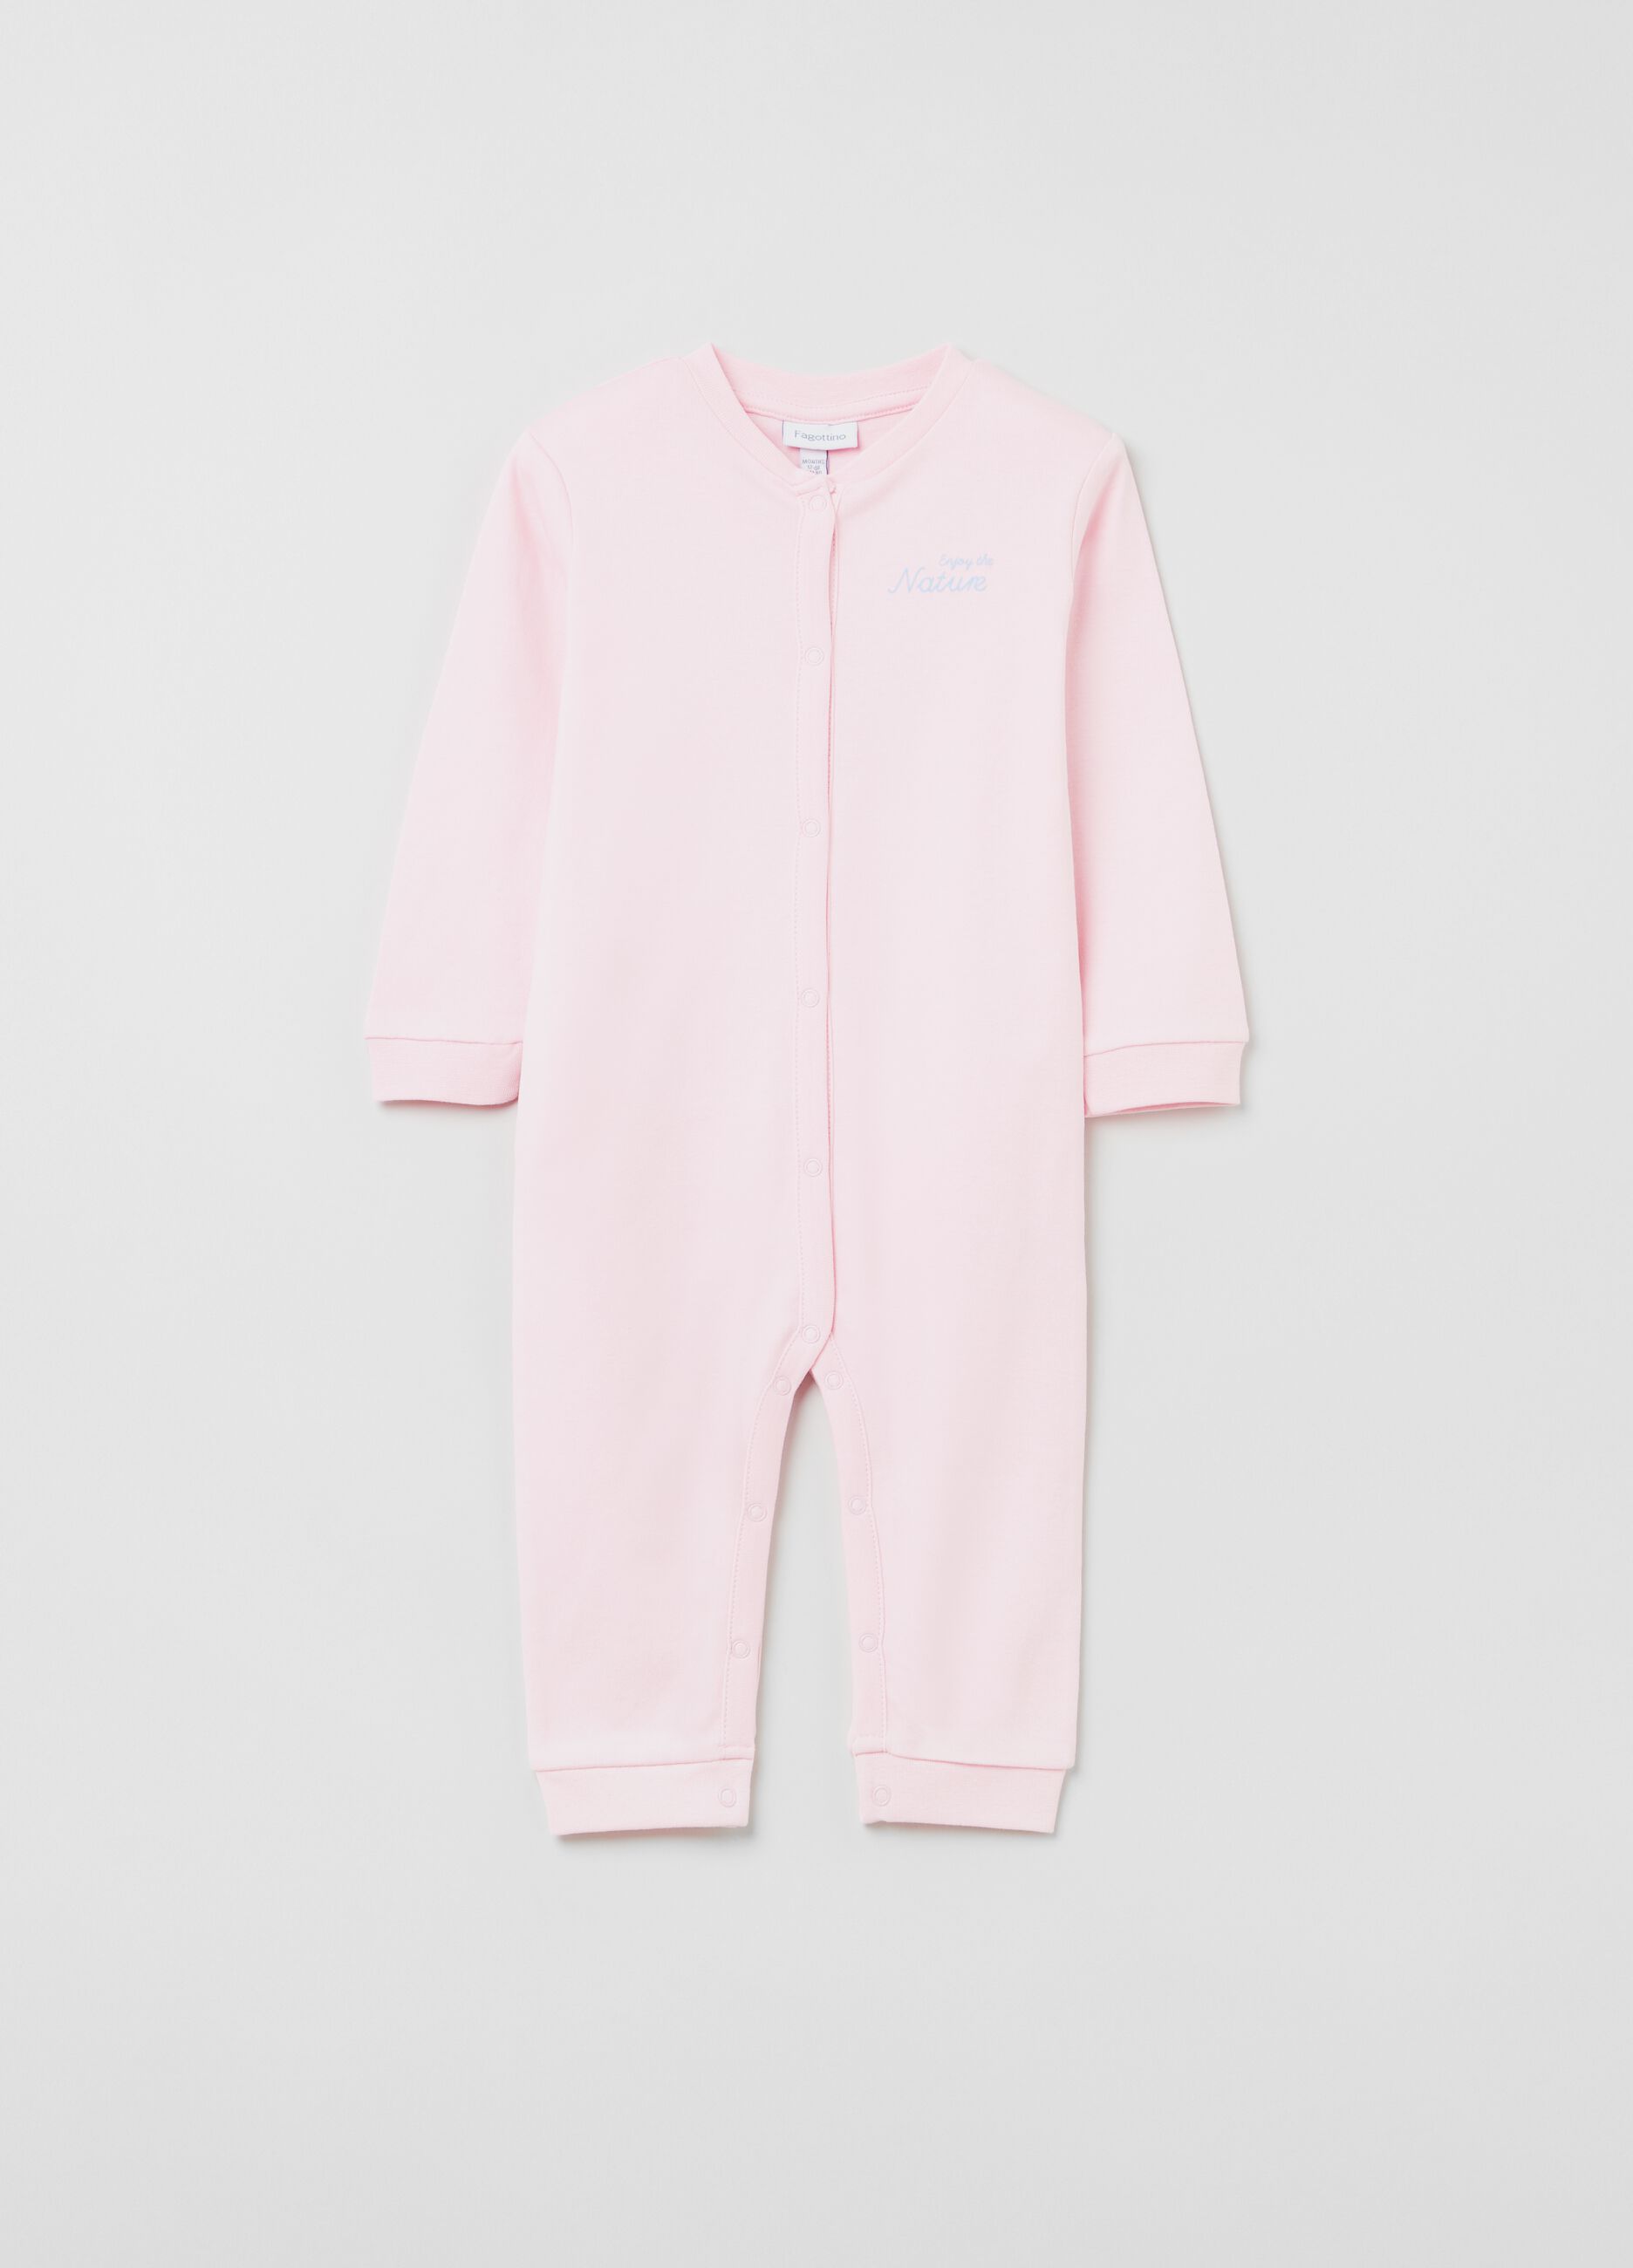 Cotton onesie with printed lettering